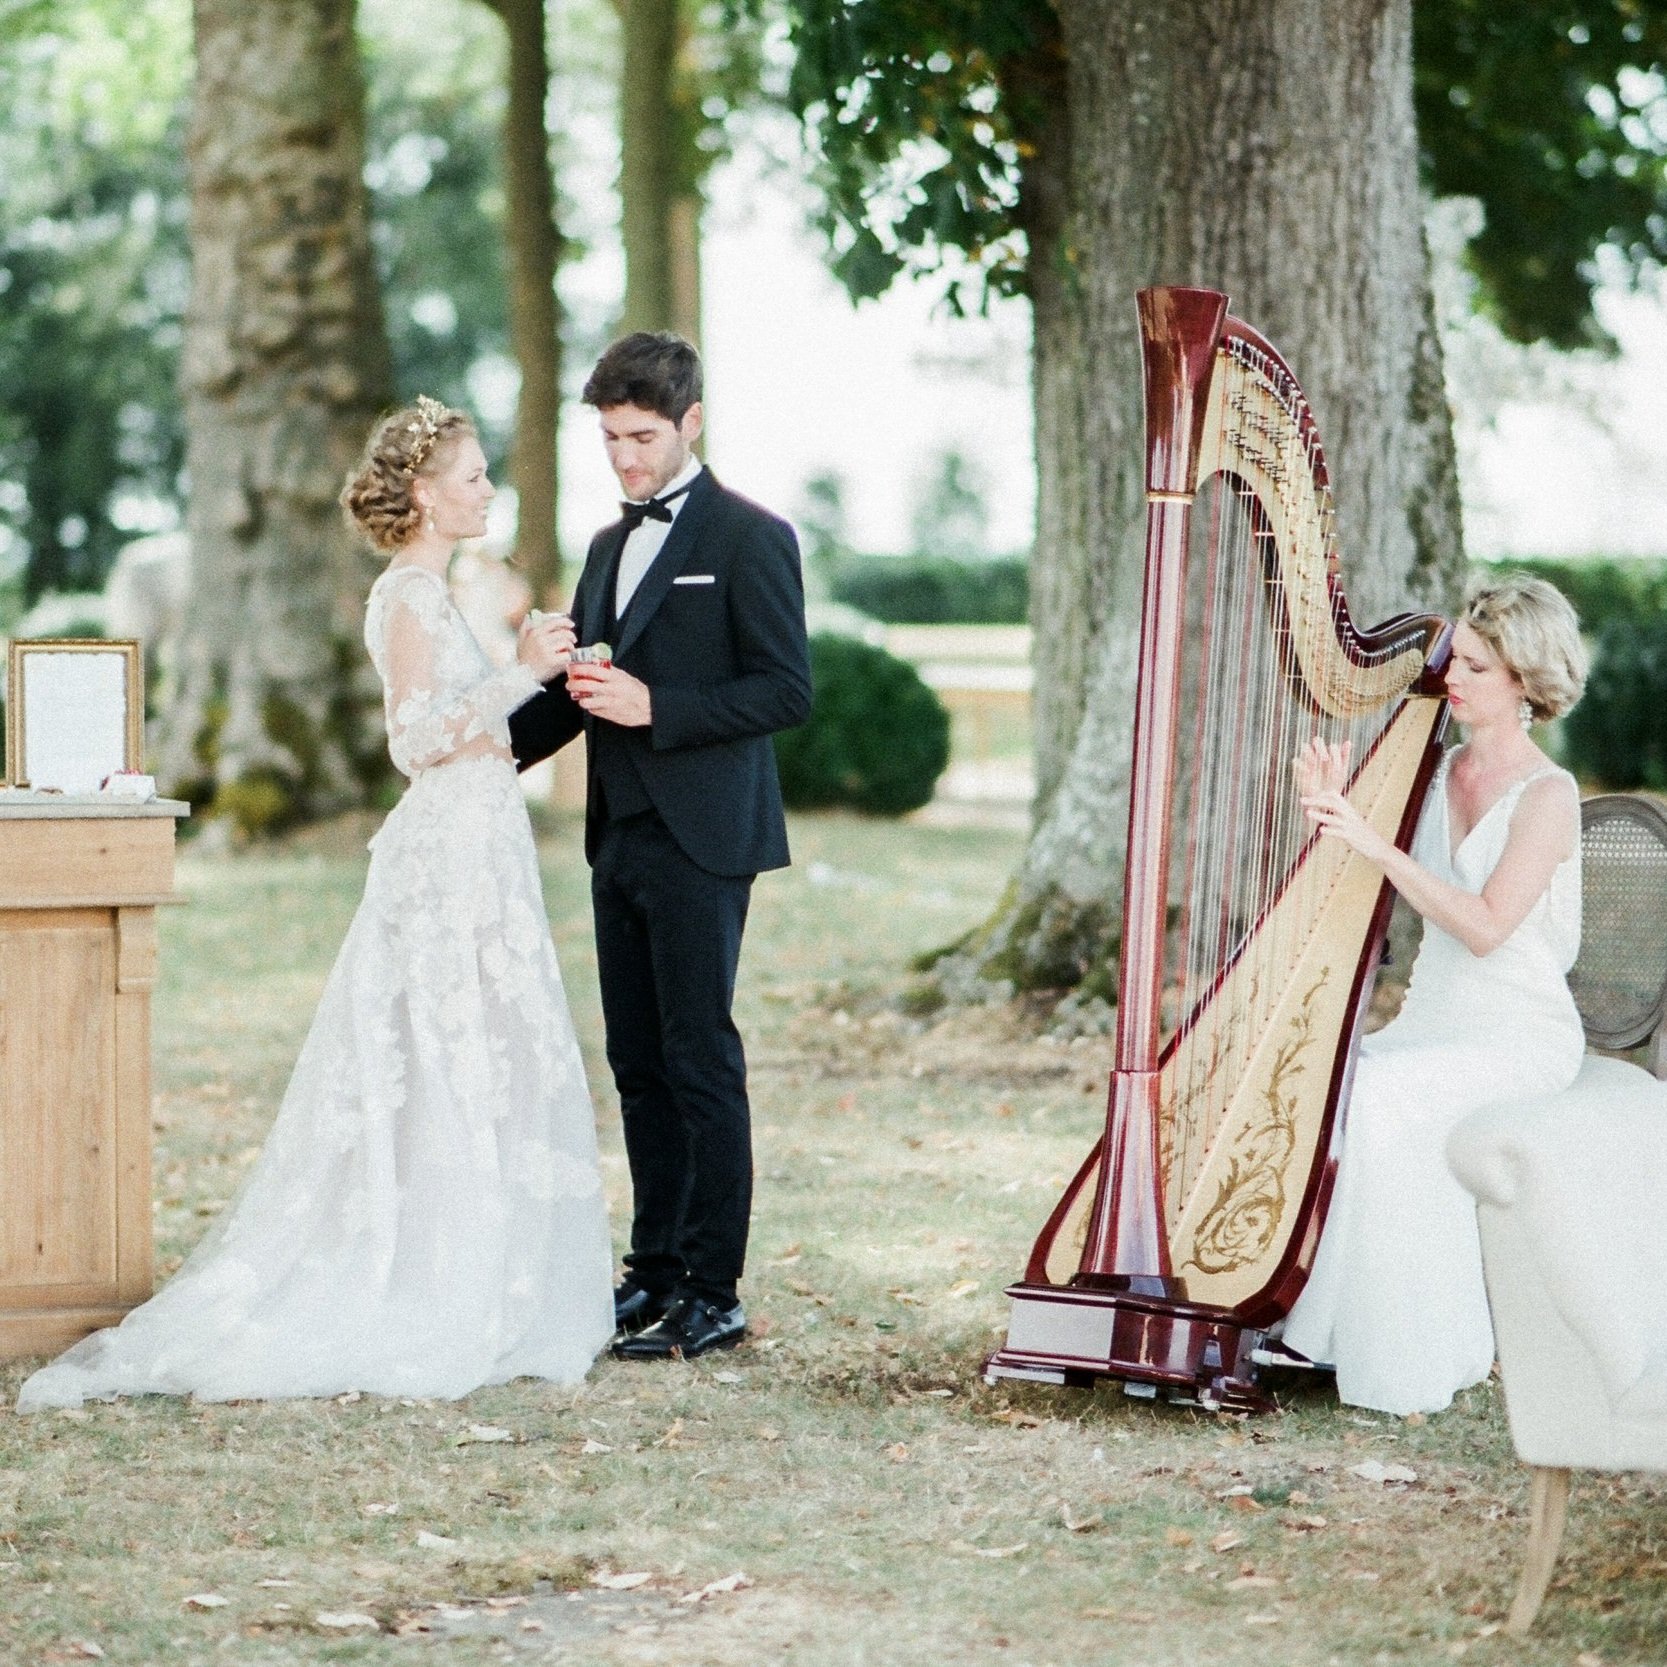 Harp-player-live-music-wedding-cocktail-luxury-wedding-Provence-French-Riviera-South-of-France.jpg